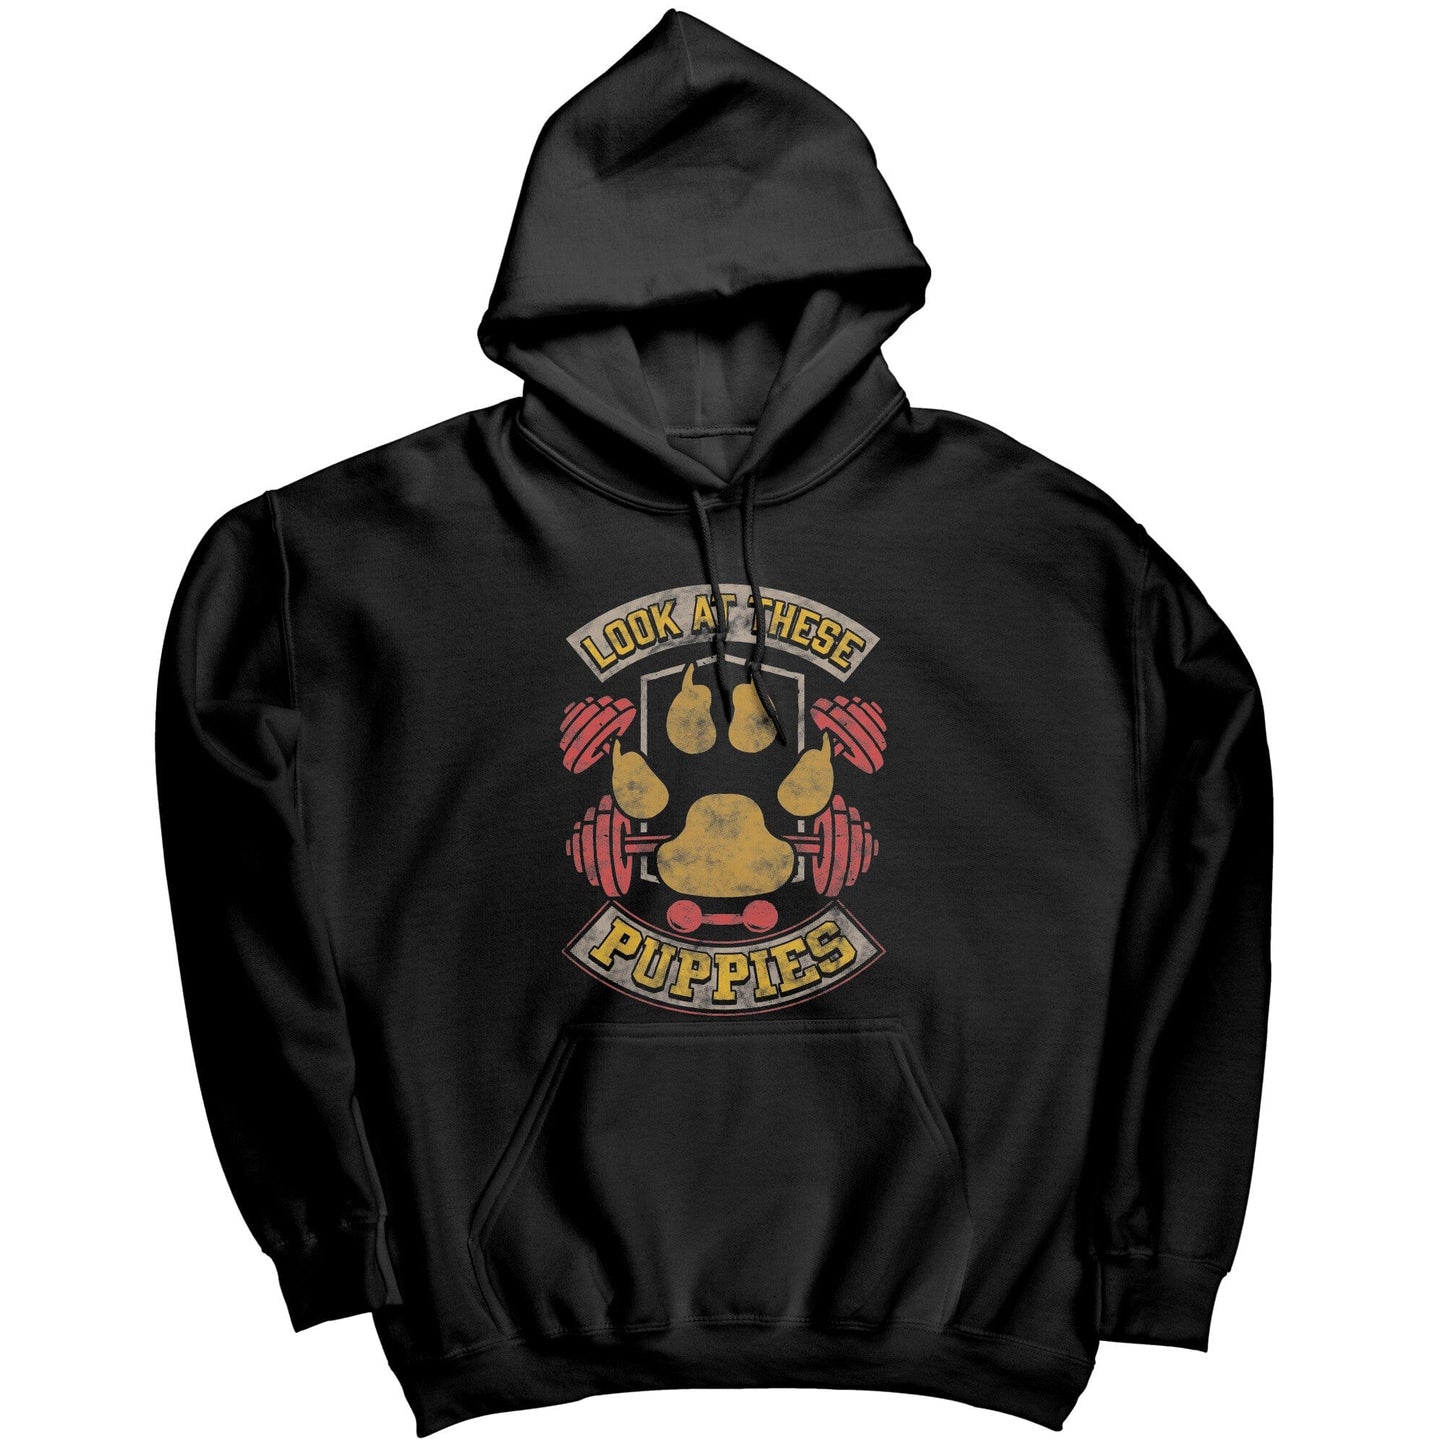 Look at these puppies muscle hoodie Black